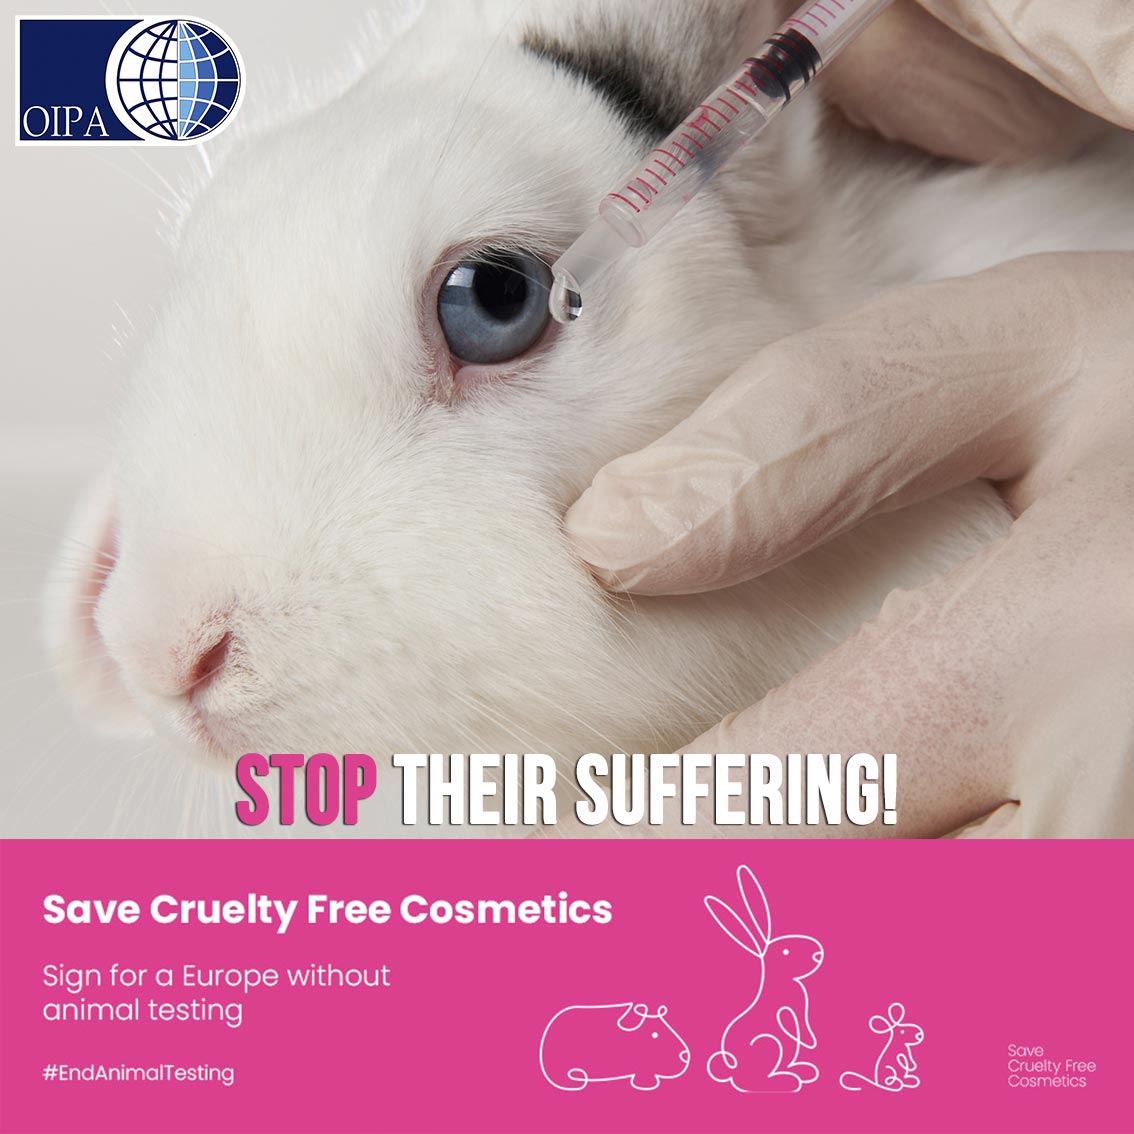 CHEMICALS ARE STILL TESTED ON ANIMALS, BY SIGNING THE ECI “SAVE CRUELTY  FREE COSMETICS” YOU CAN SAY STOP TO ANIMAL TESTING | OIPA